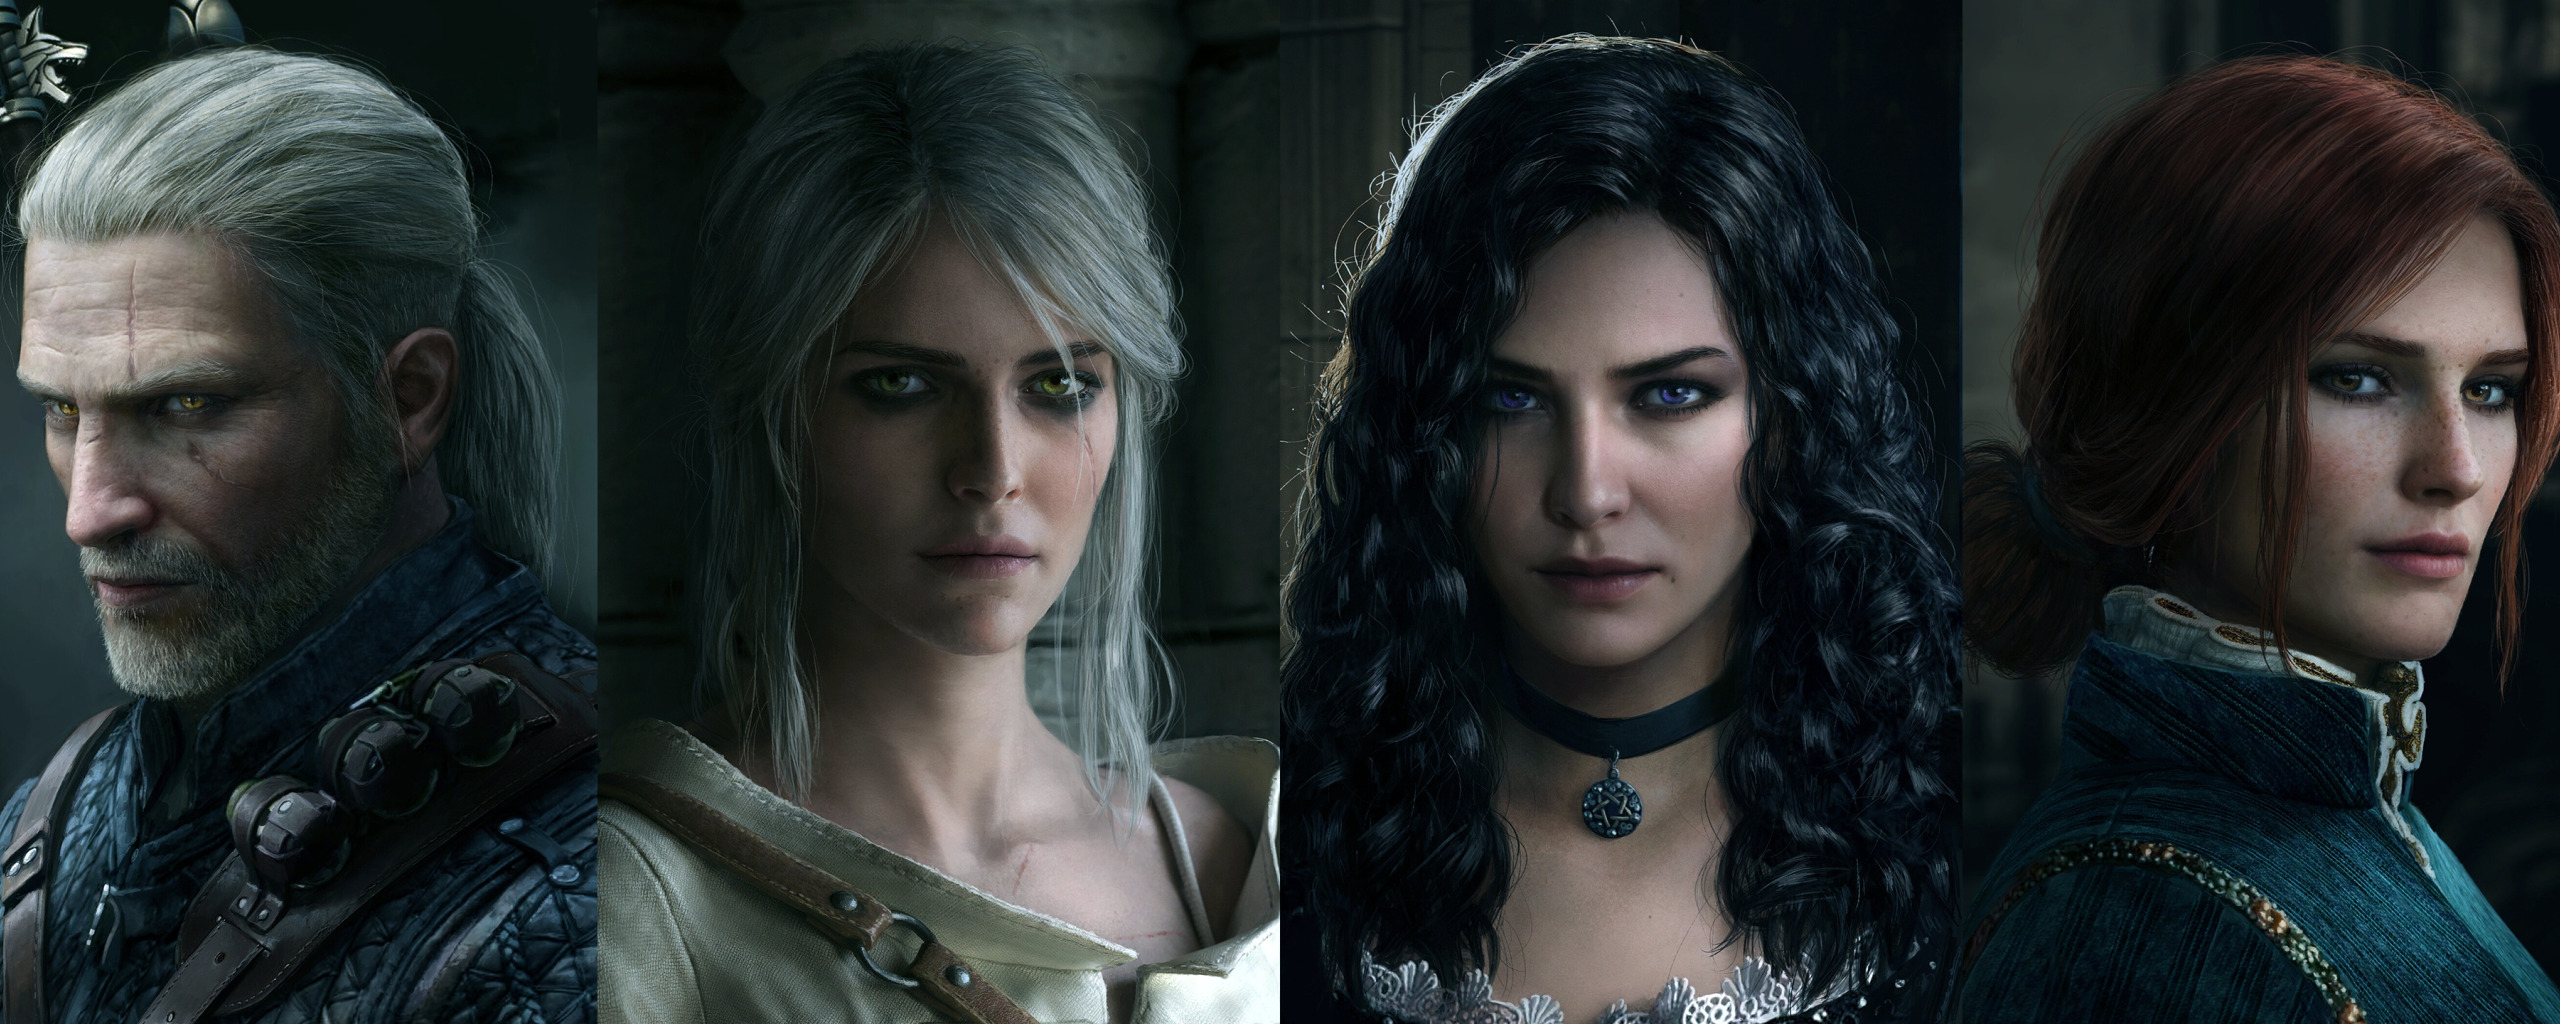 Yennefer of vengerberg the witcher 3 voiced standalone follower фото 106